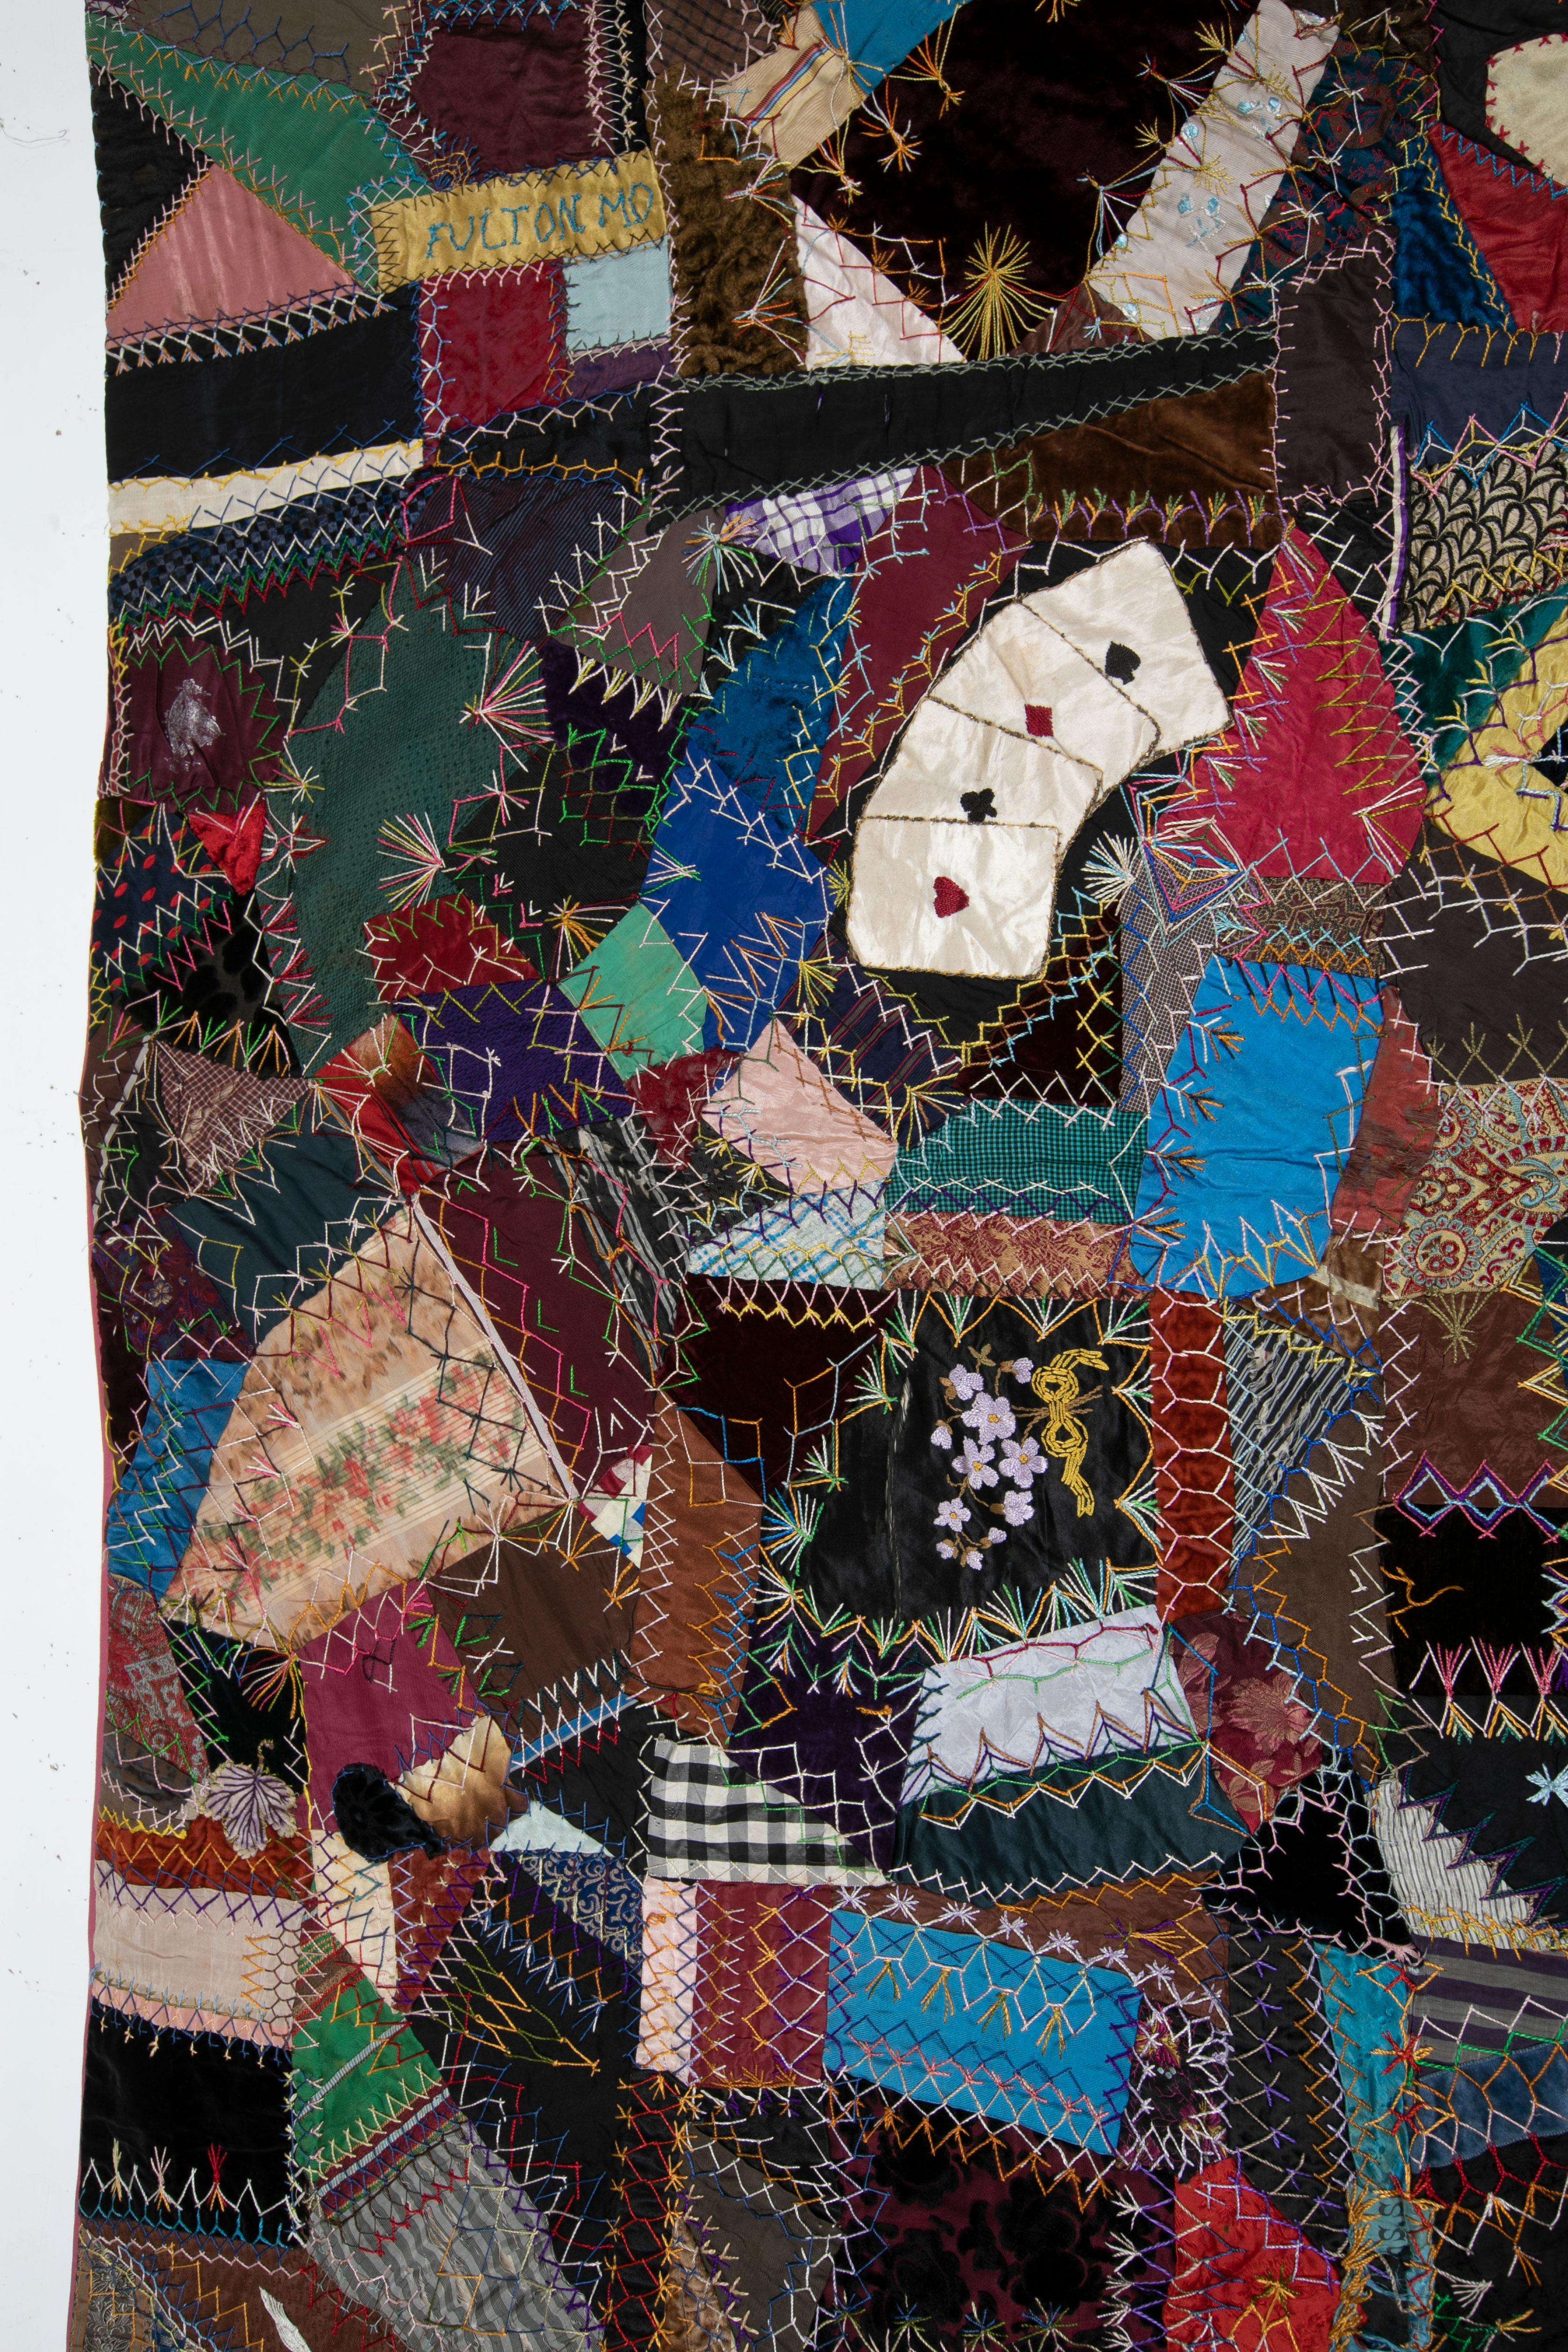 American Crazy Quilt, Fulton, MO, USA, Late 19th C.